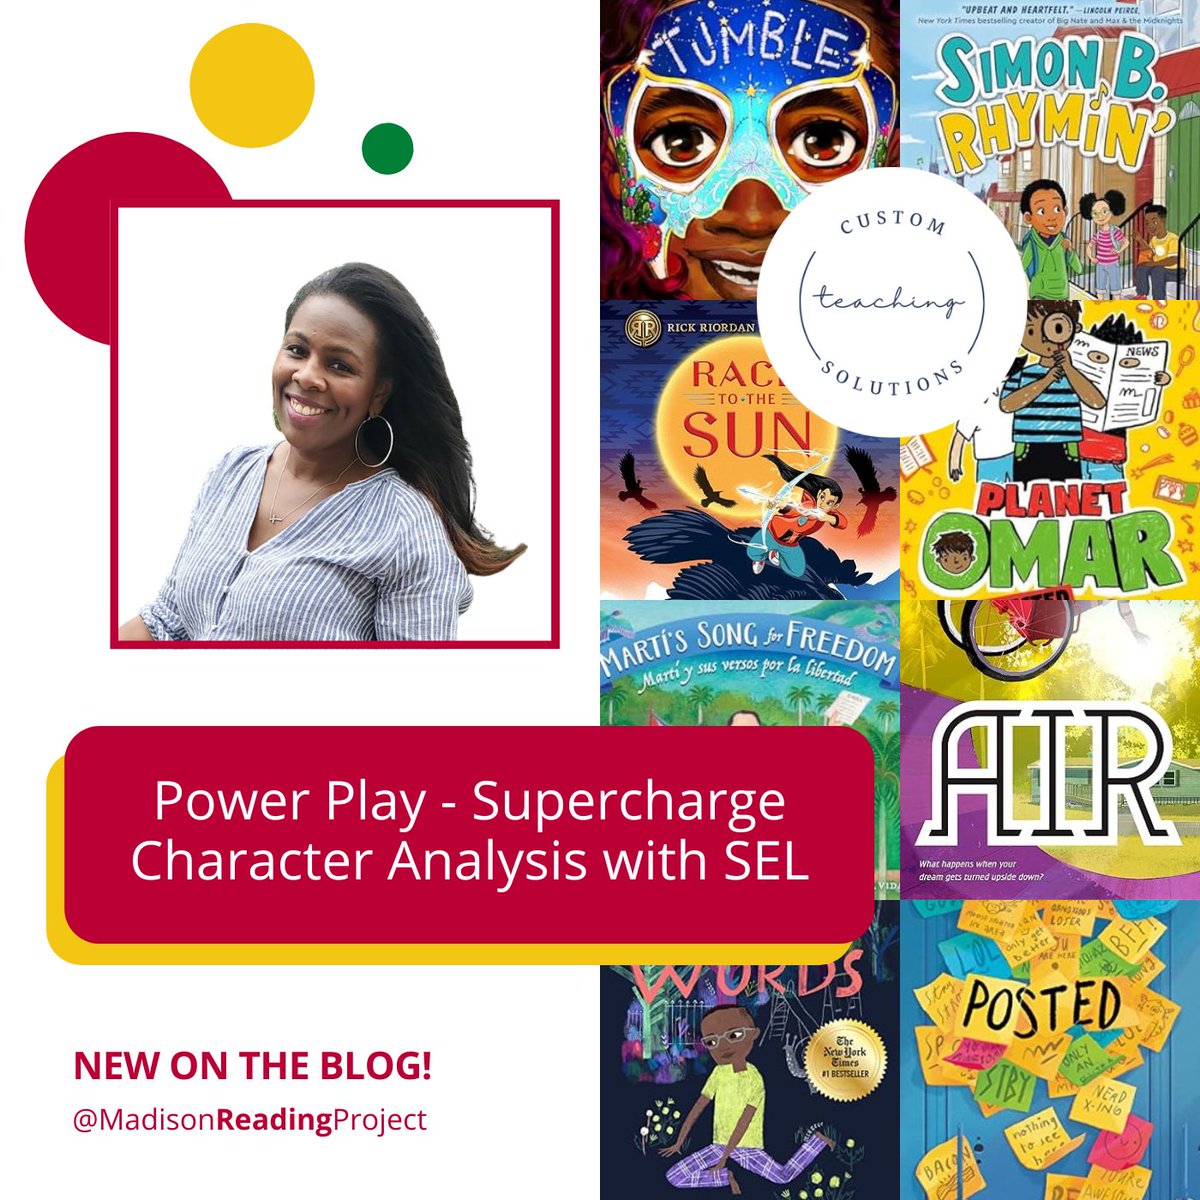 📚 In this post, our friend Jocelynn from Custom Teaching Solutions gives us a framework on how to design an effective lesson plan to more deeply engage students with character analysis. Check it out at madisonreadingproject.com/blog

#NewBookFeeling #TeacherAppreciationWeek